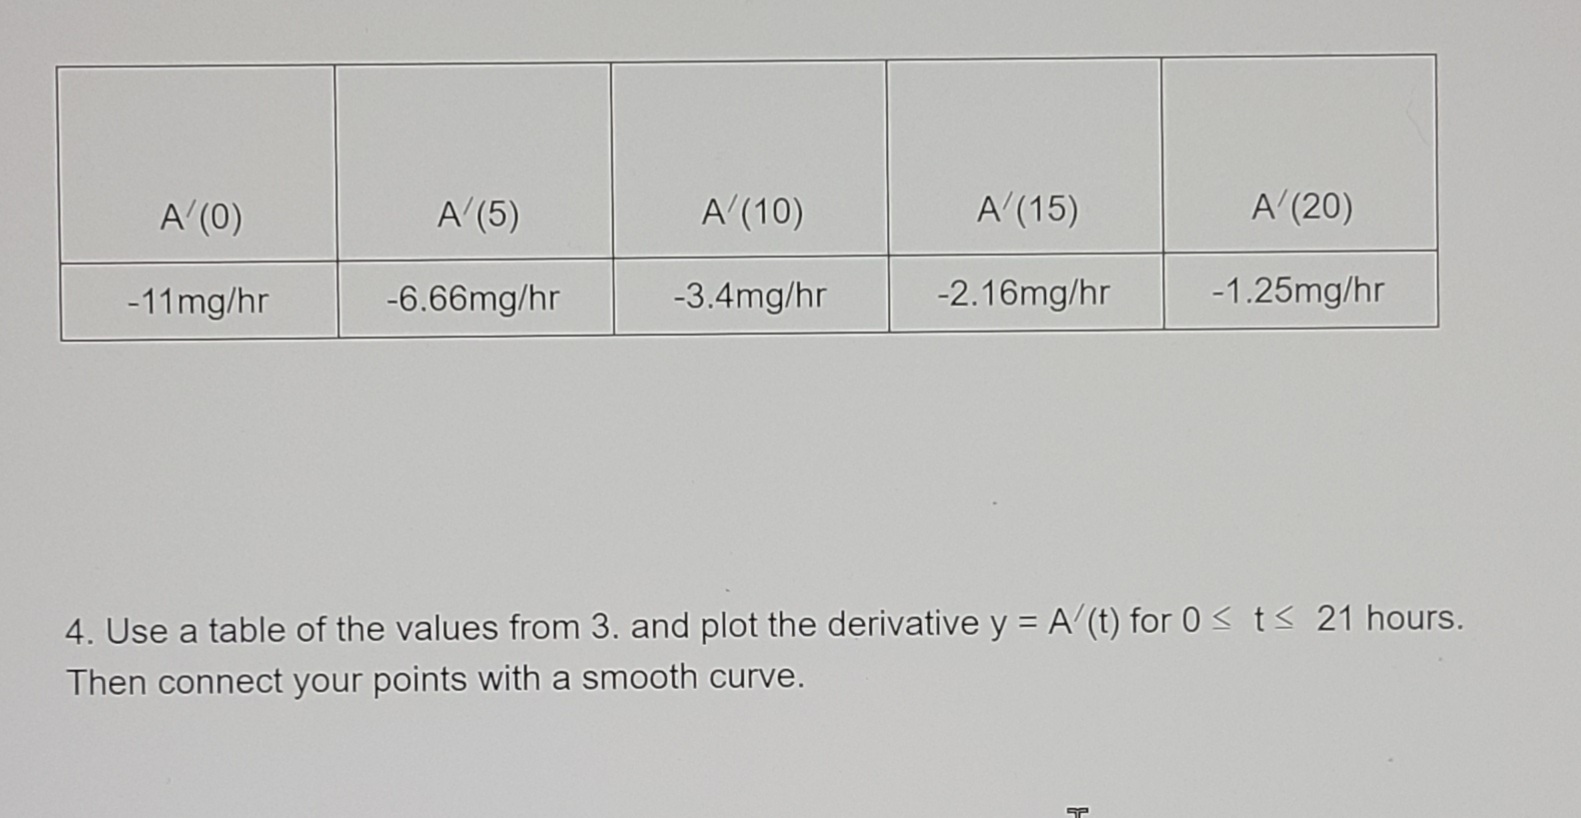 A'(0)
A (5)
A (10)
A (15)
A (20)
-11mg/hr
-6.66mg/hr
-3.4mg/hr
-2.16mg/hr
-1.25mg/hr
4. Use a table of the values from 3. and plot the derivative y = A (t) for 0 < t< 21 hours.
%3D
Then connect your points with a smooth curve.
